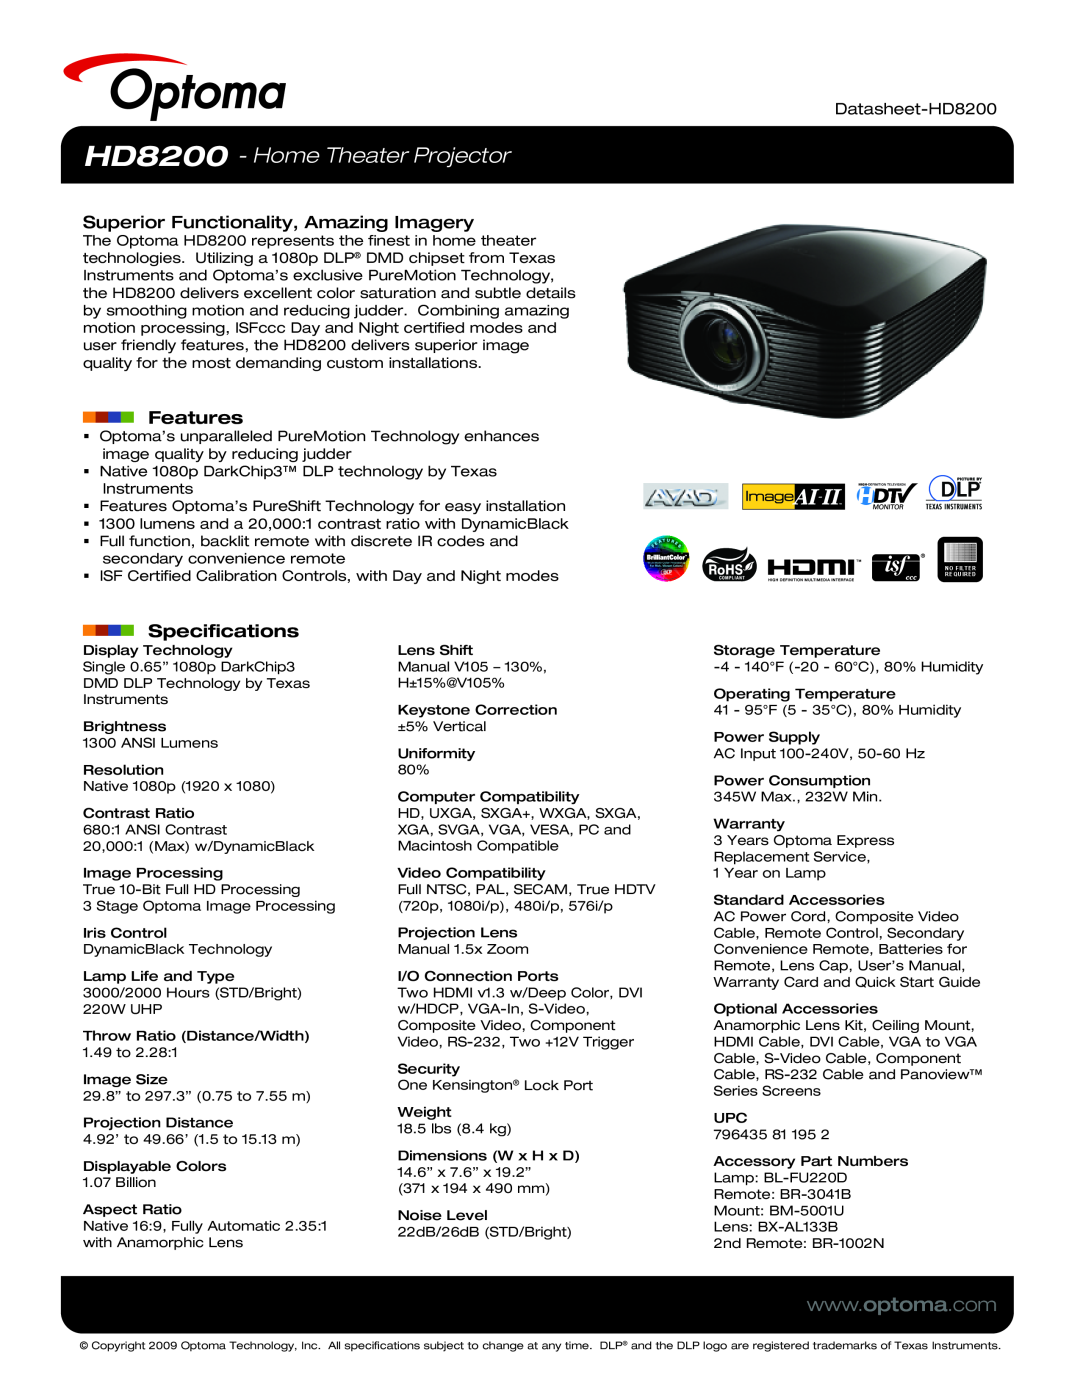 Optoma Technology specifications HD8200 - Home Theater Projector, Superior Functionality, Amazing Imagery, Features 